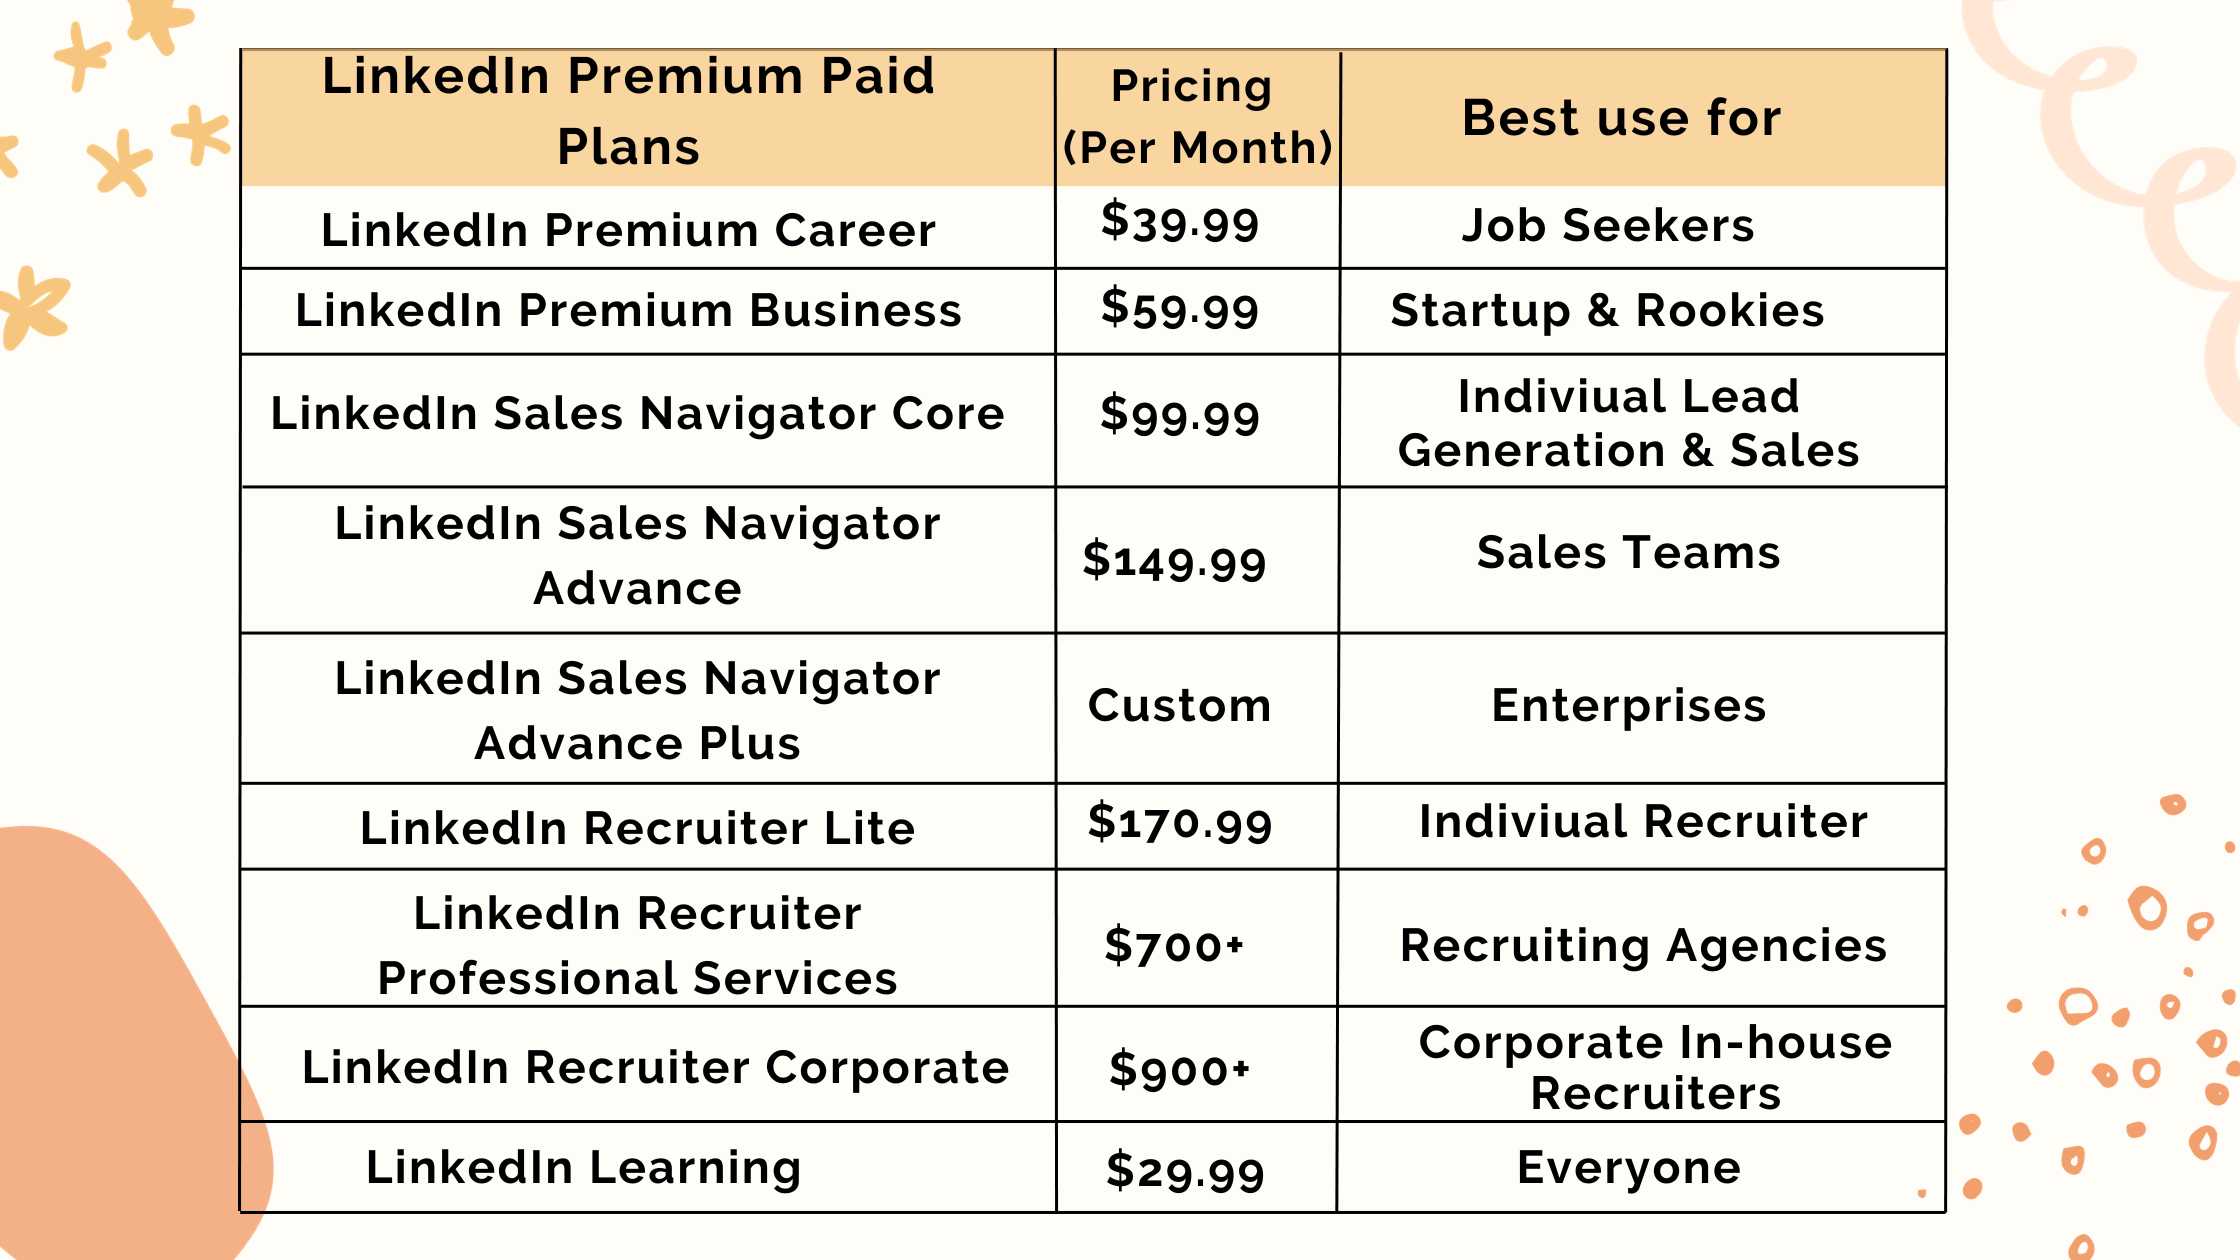 Table shows LinkedIn premium paid plans with pricing and their best use